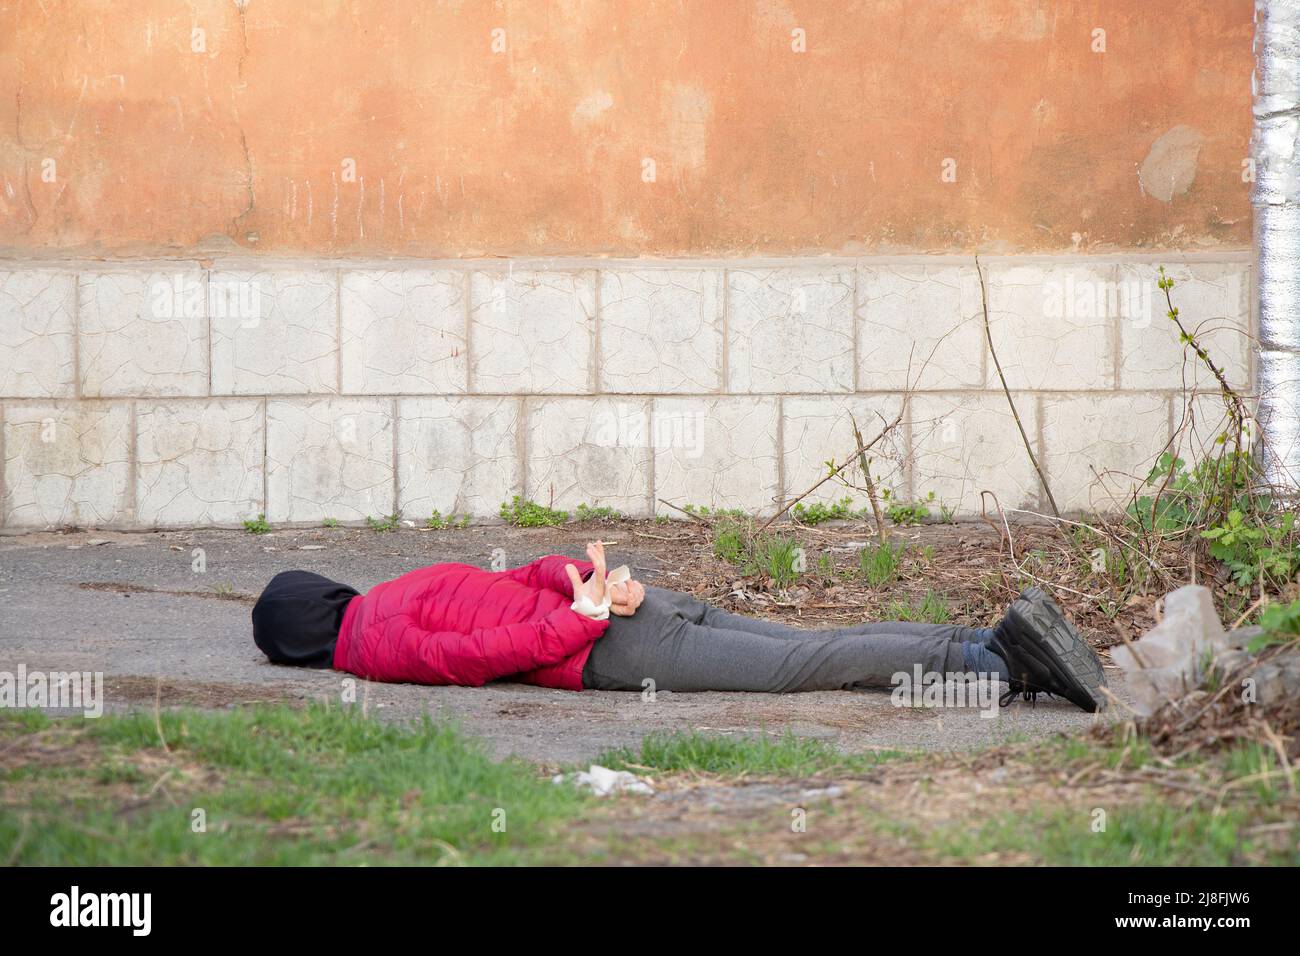 A dead Ukrainian woman lies on the street with her hands tied with a white rope and was killed in the back in Ukraine, a death protest in the city of Stock Photo